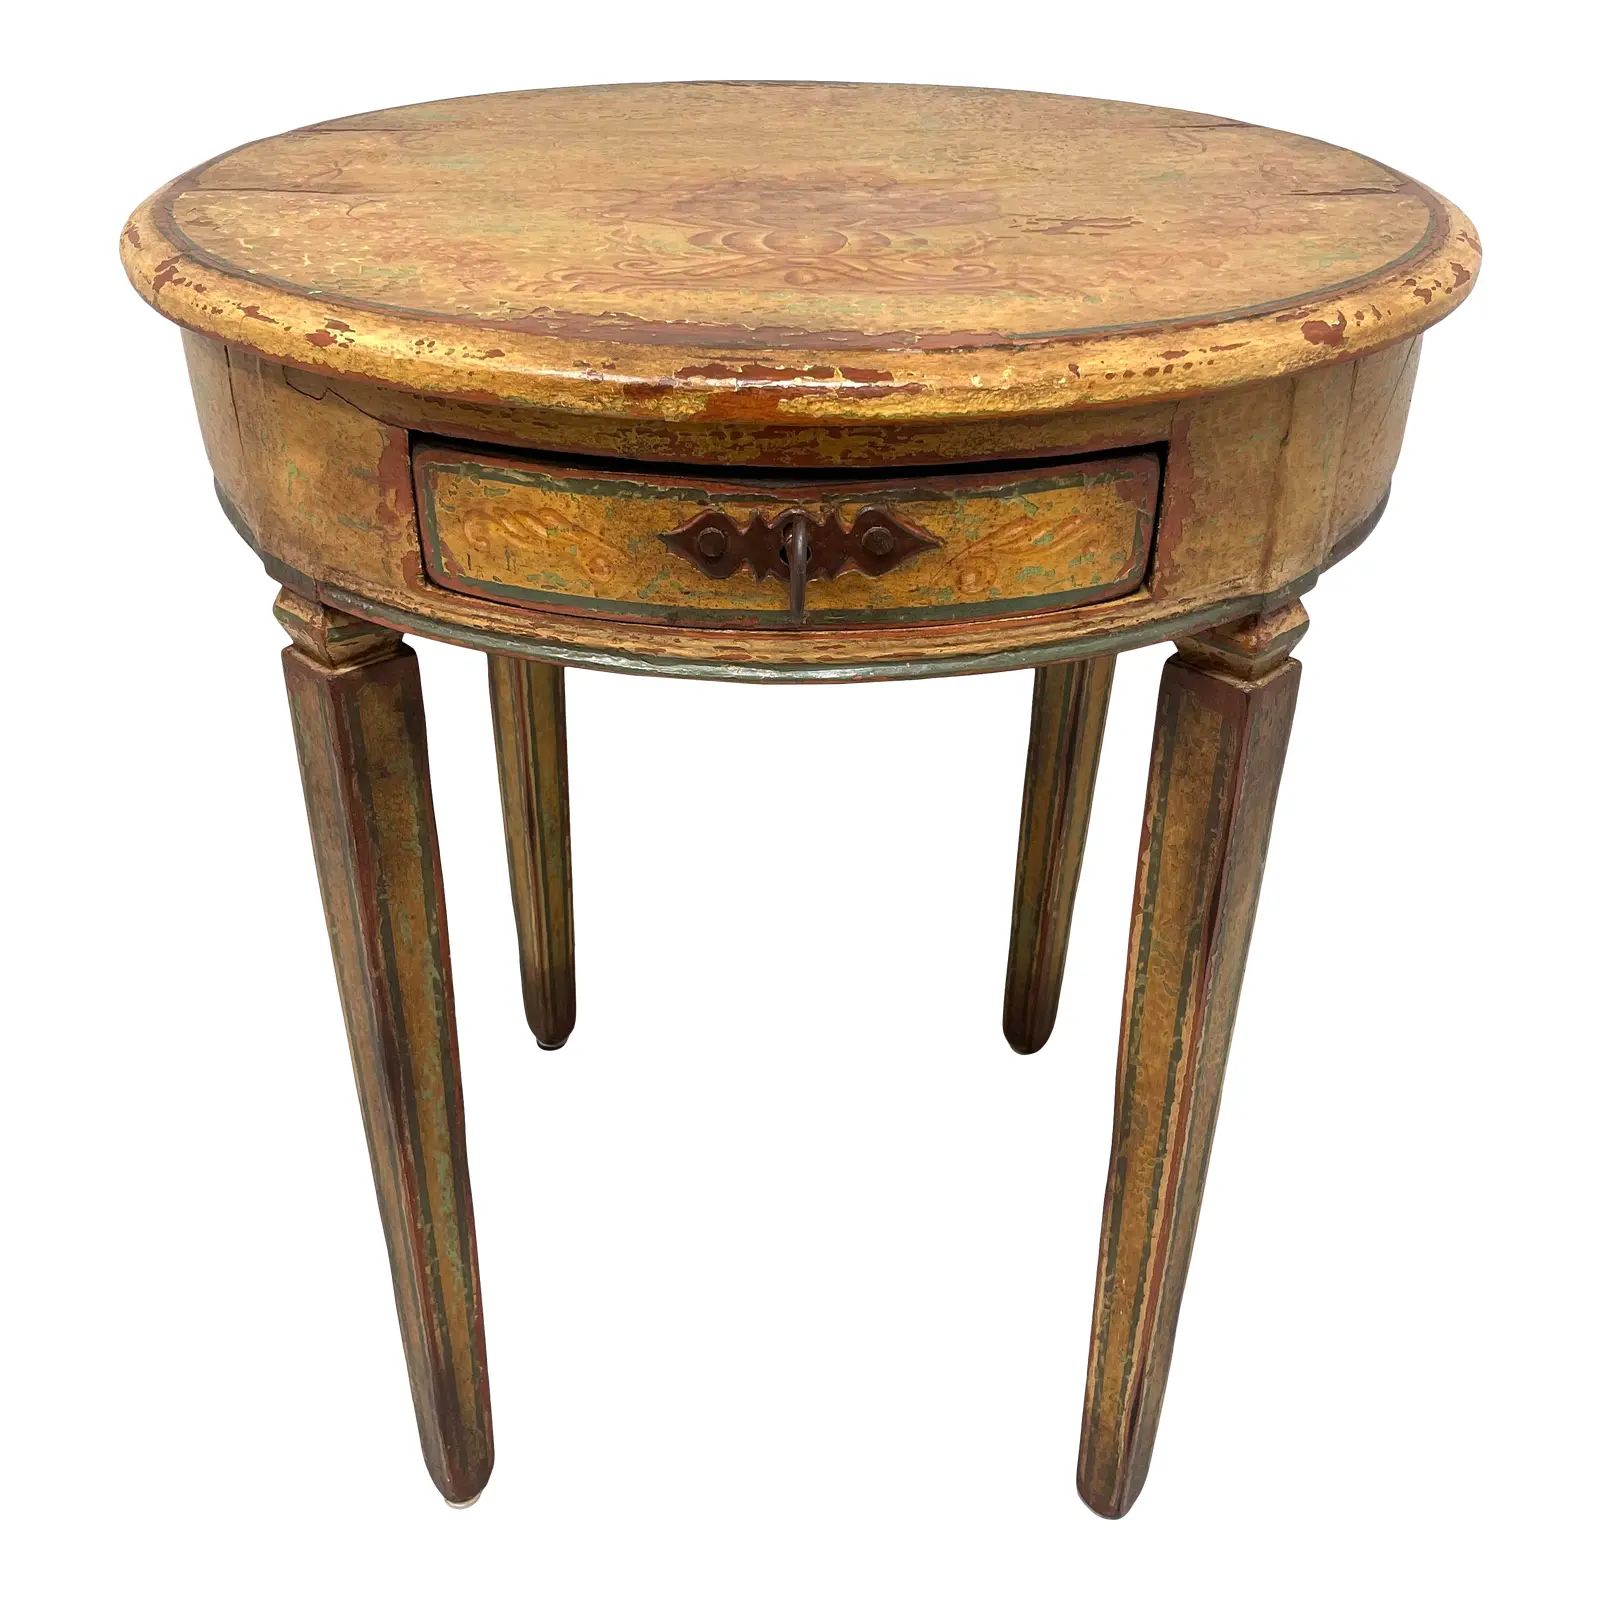 Antique 18th Century Hand Painted Round Accent Table | Chairish